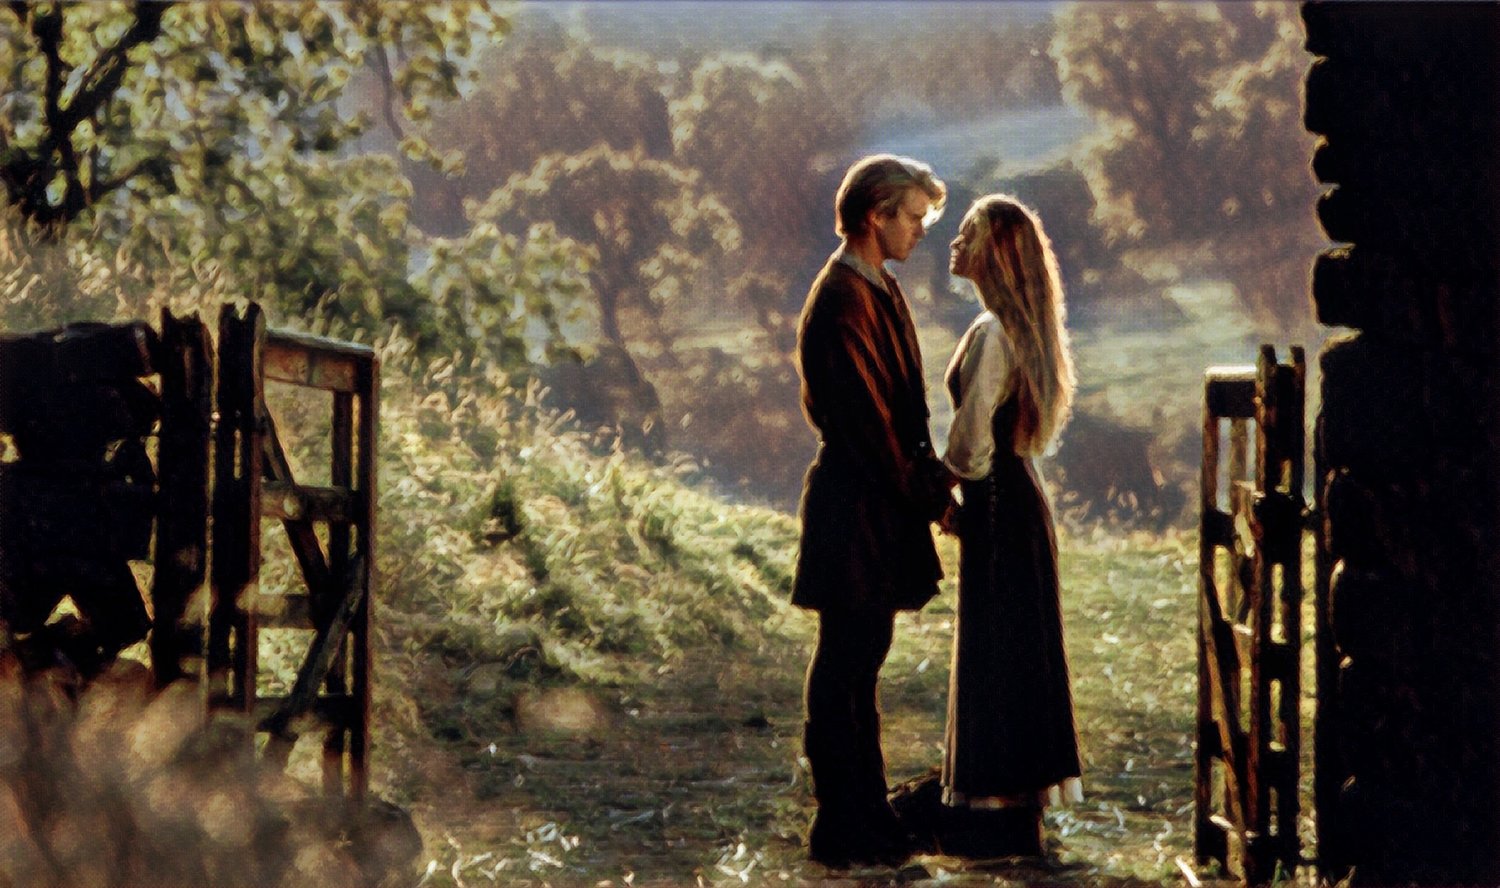 The Princess Bride, minutes 38 to 40